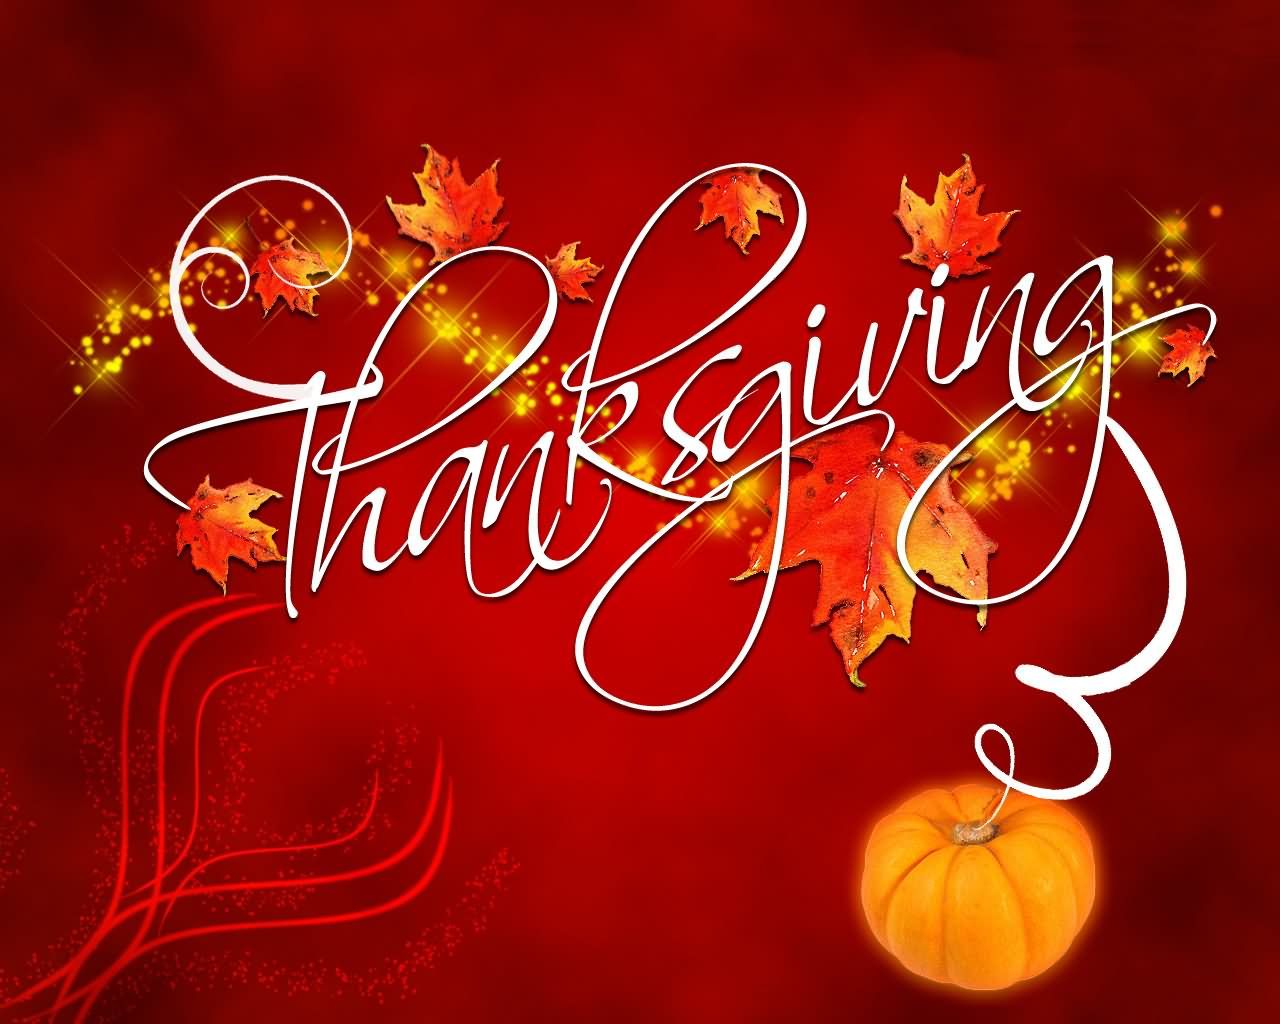 Free Download Happy Thanksgiving Wishes Hd Wallpapers Download Free